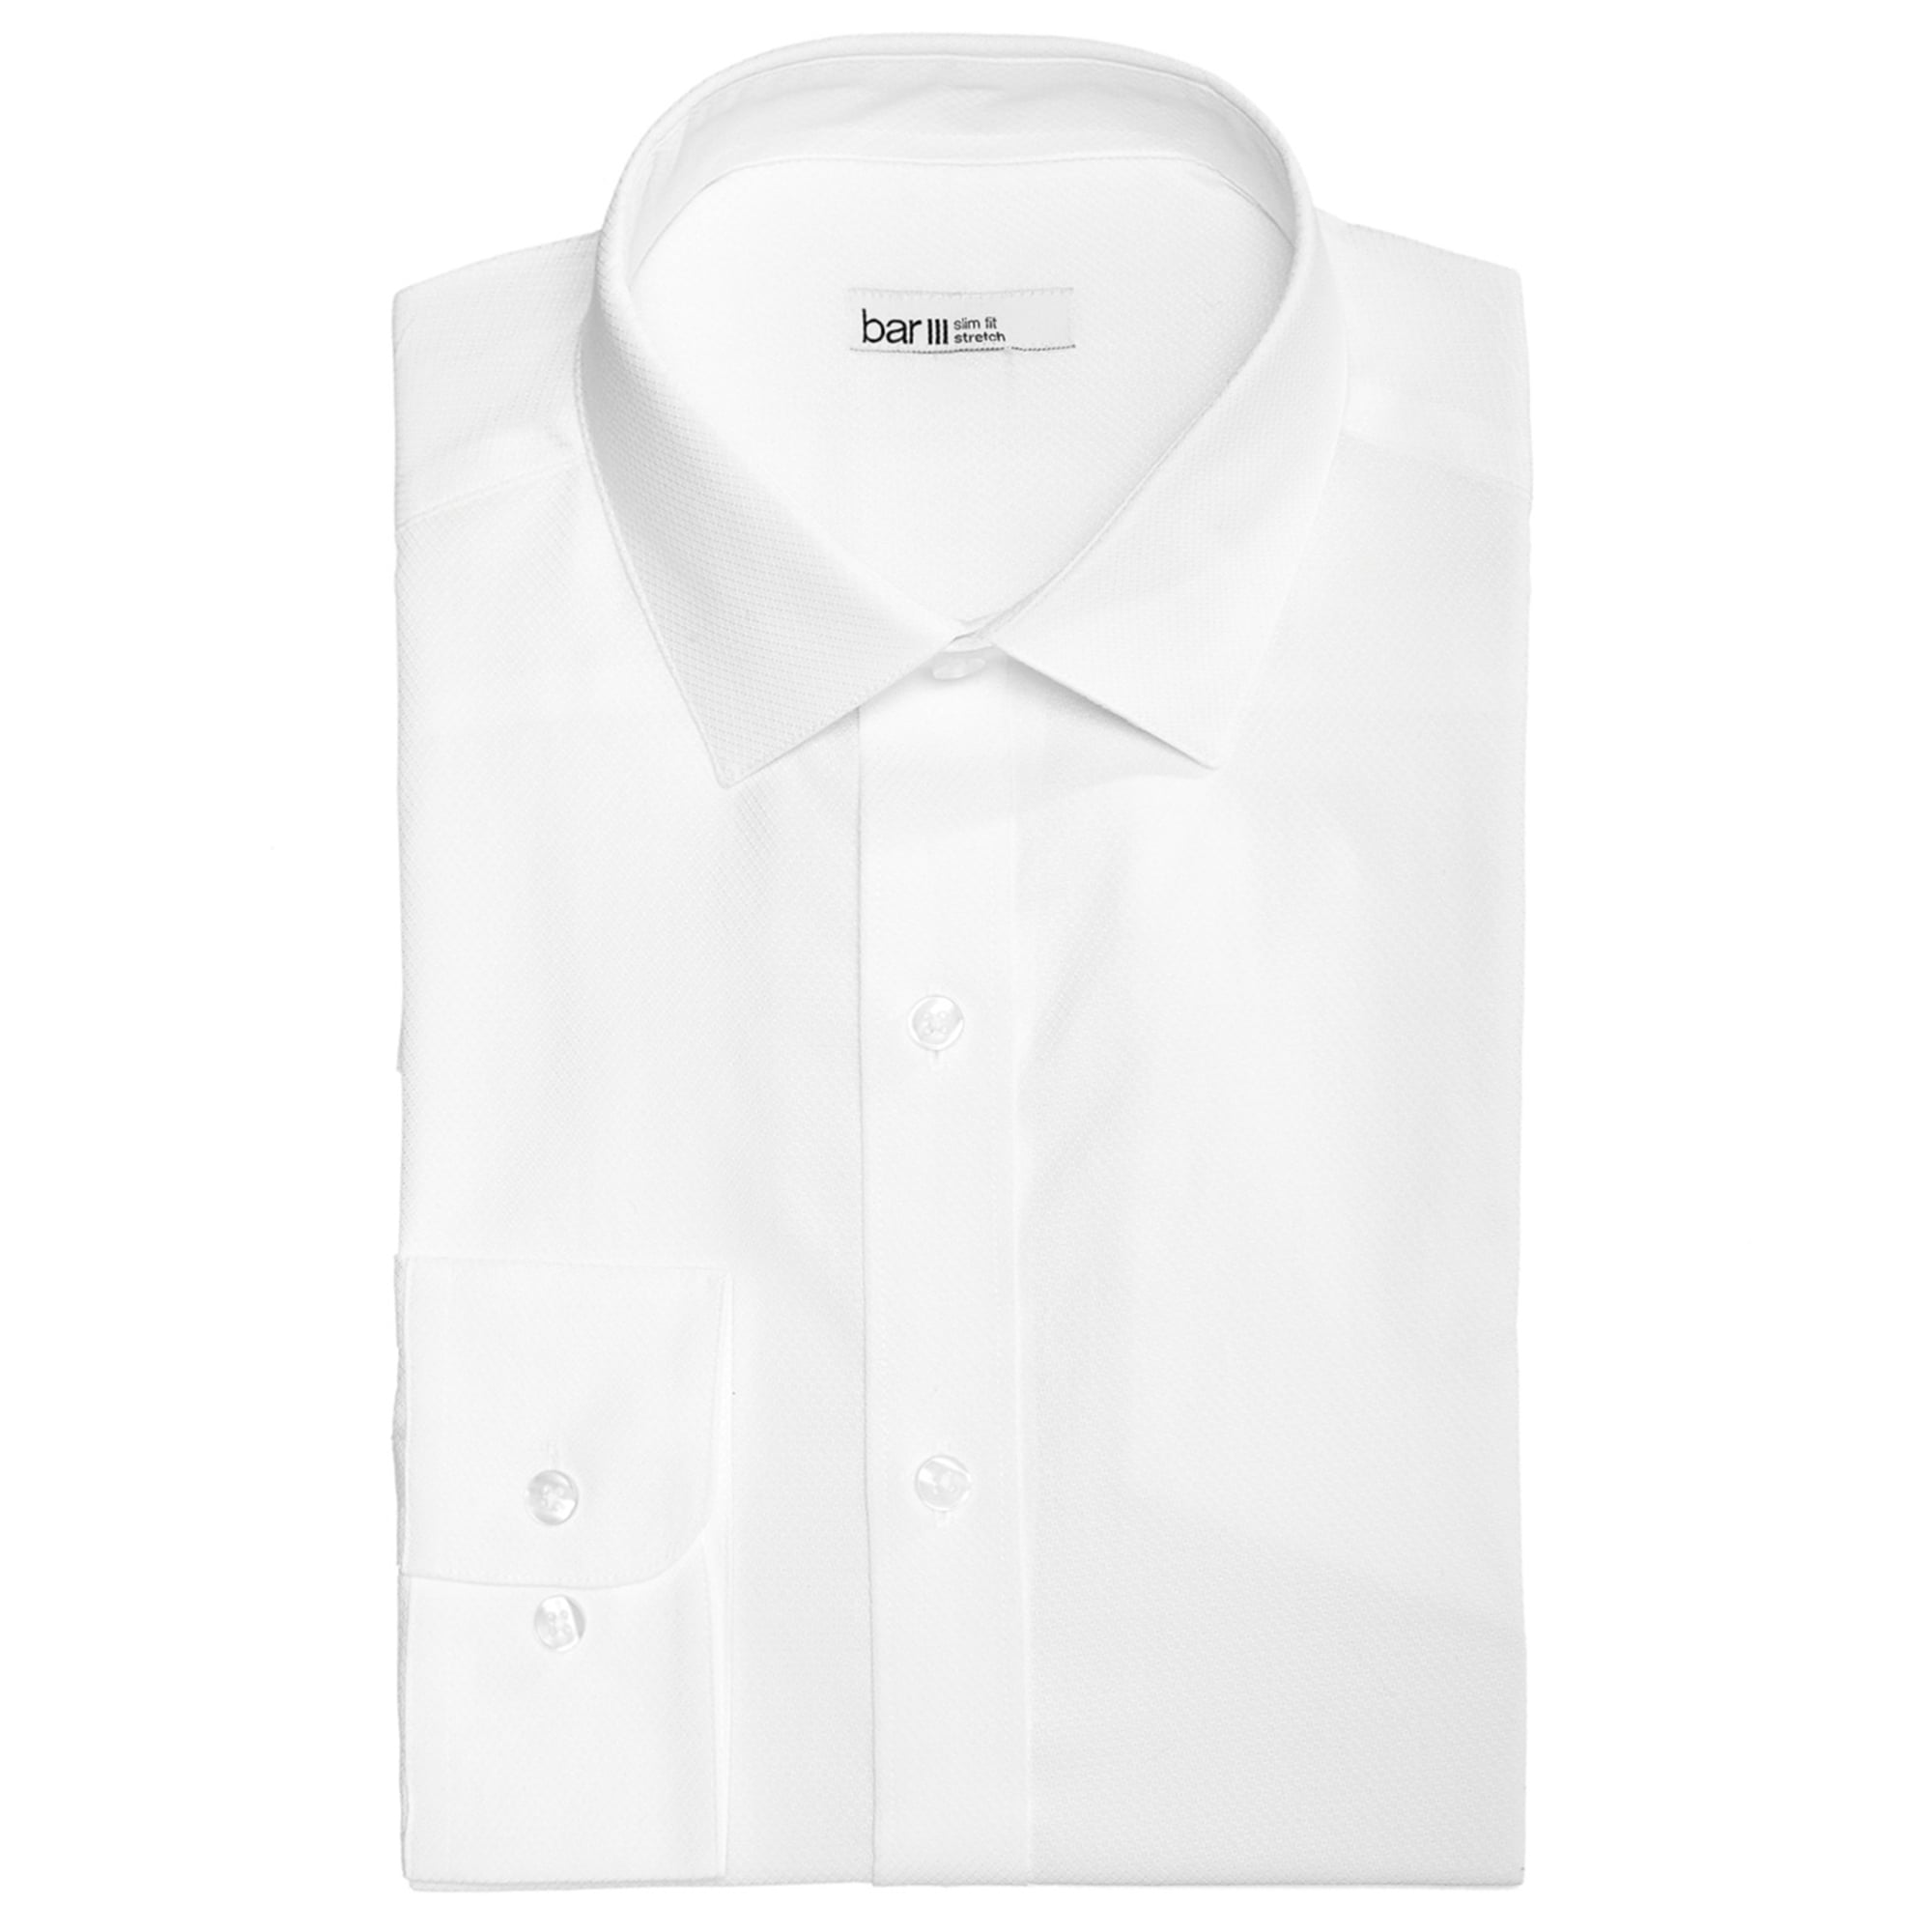 Details about   Modena Men's Slim Fit White Textured French Cuff Cotton Dress Shirt